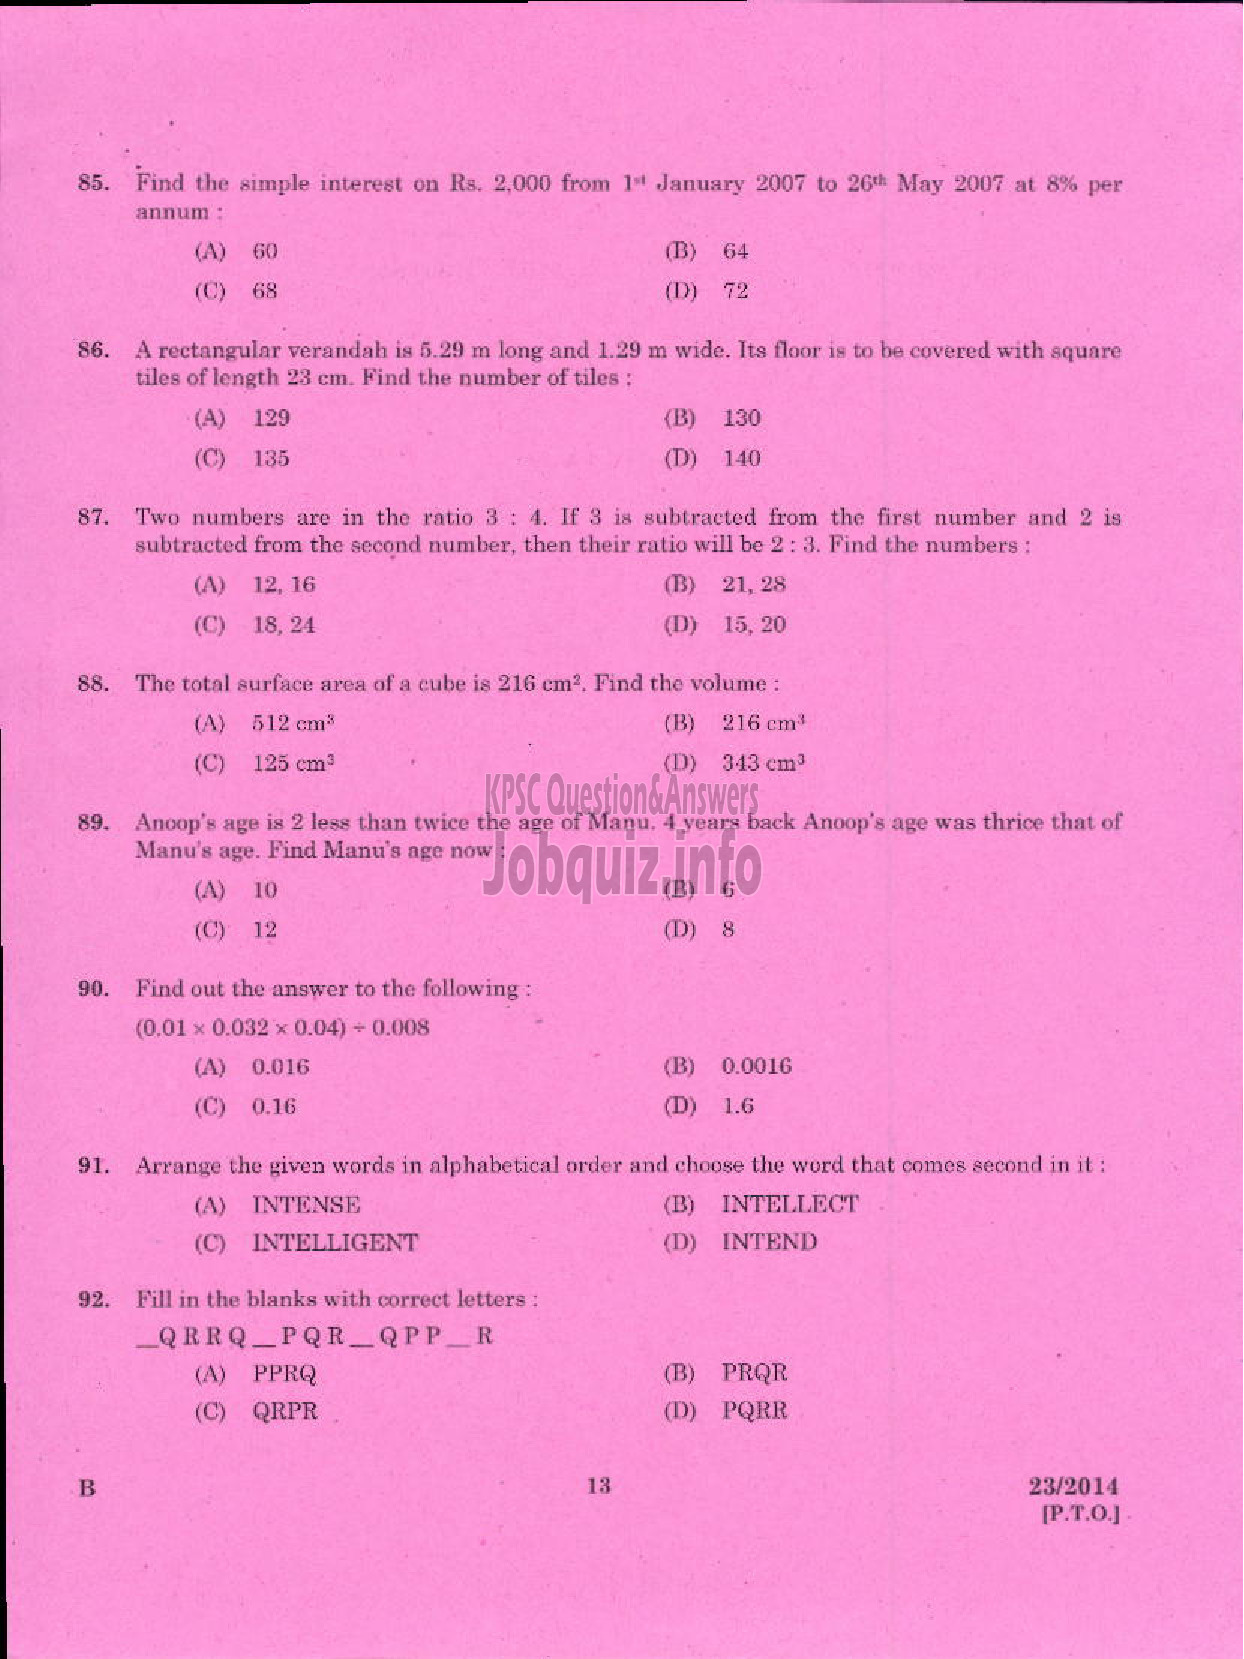 Kerala PSC Question Paper - EXCISE GUARD/WOMAN GUARD SR FOR SC/ST ONLY EXCISE PLKD TSR-11